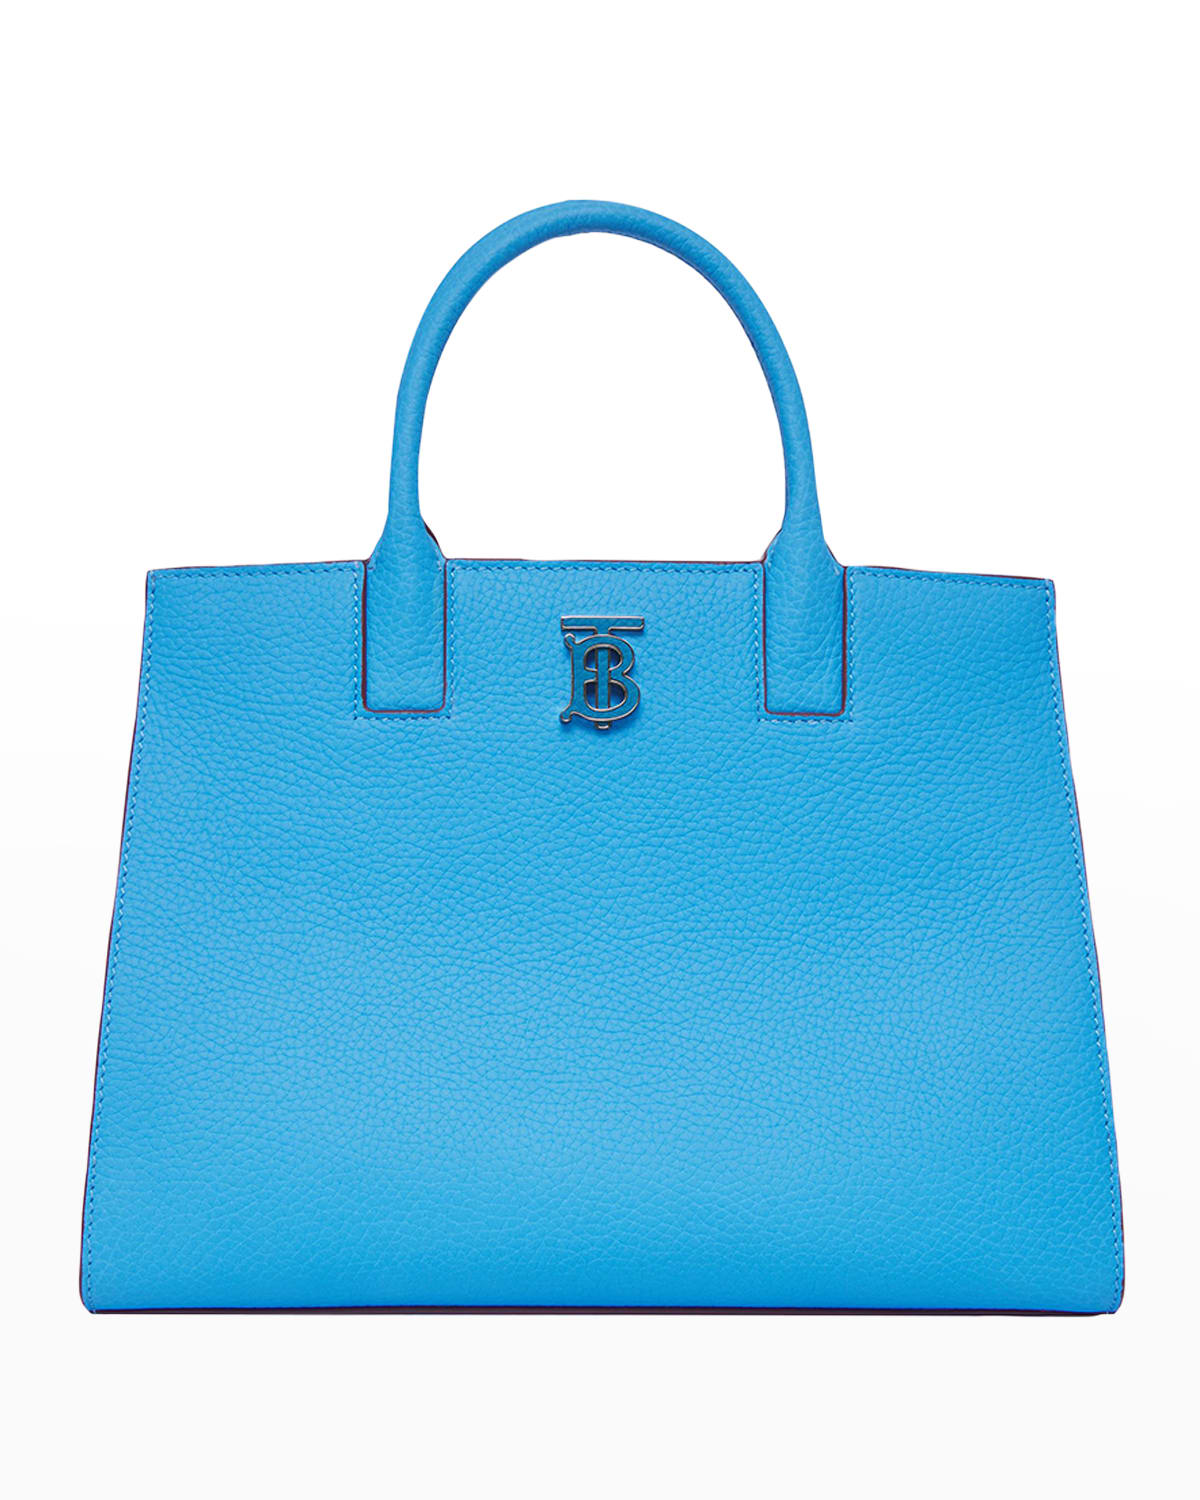 TB Grainy Leather Tote Bag